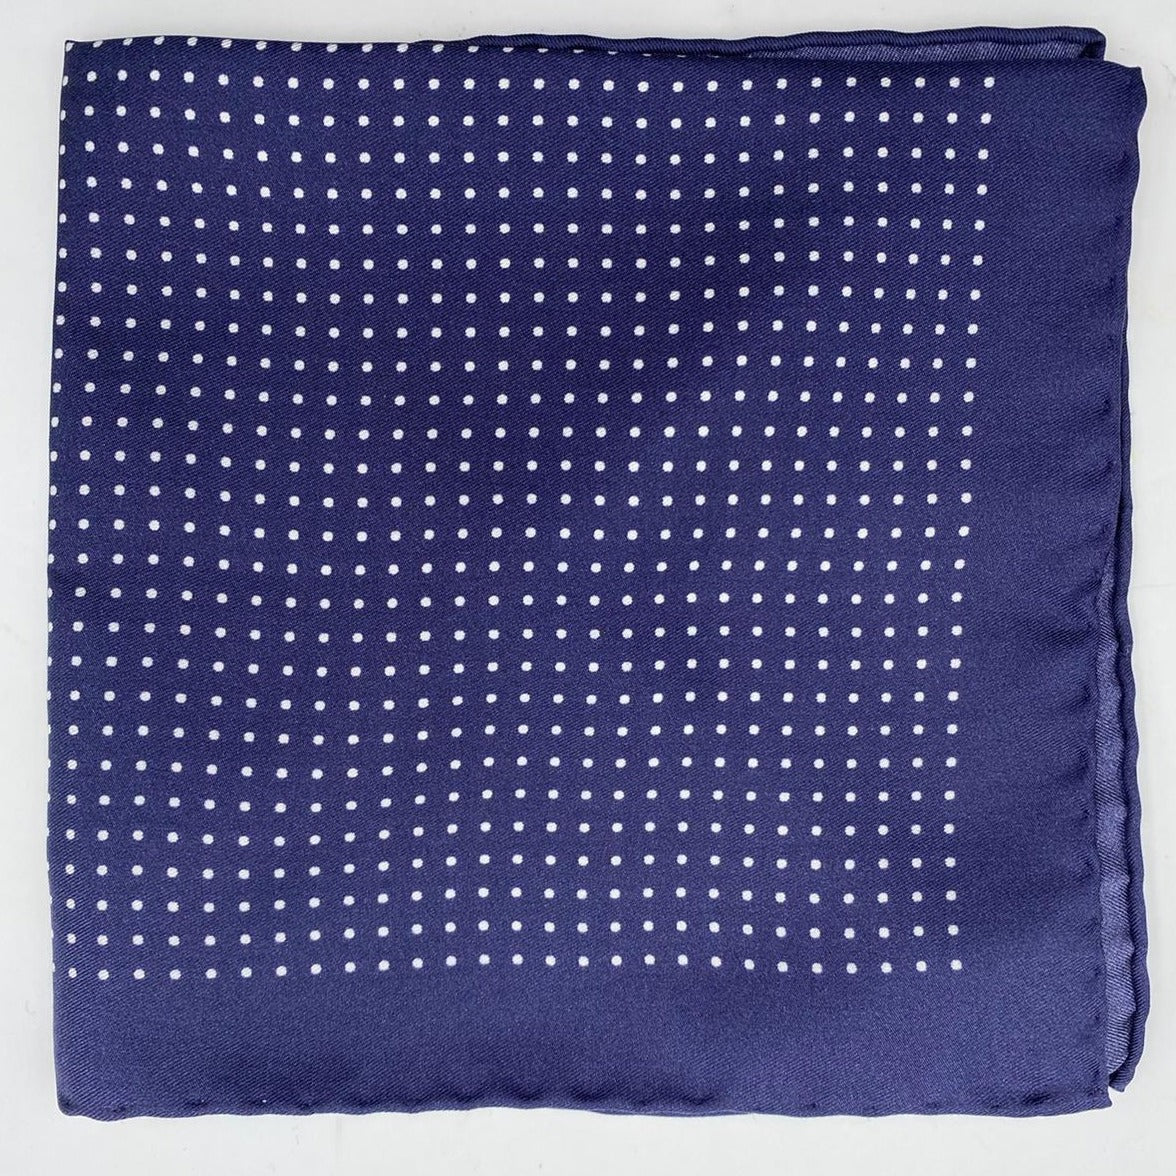 Cruciani & Bella 100% Printed Silk  Hand-rolled Blue and White Dot Motif Pocket Square Handmade in England 32 cm  X 32 cm #2635